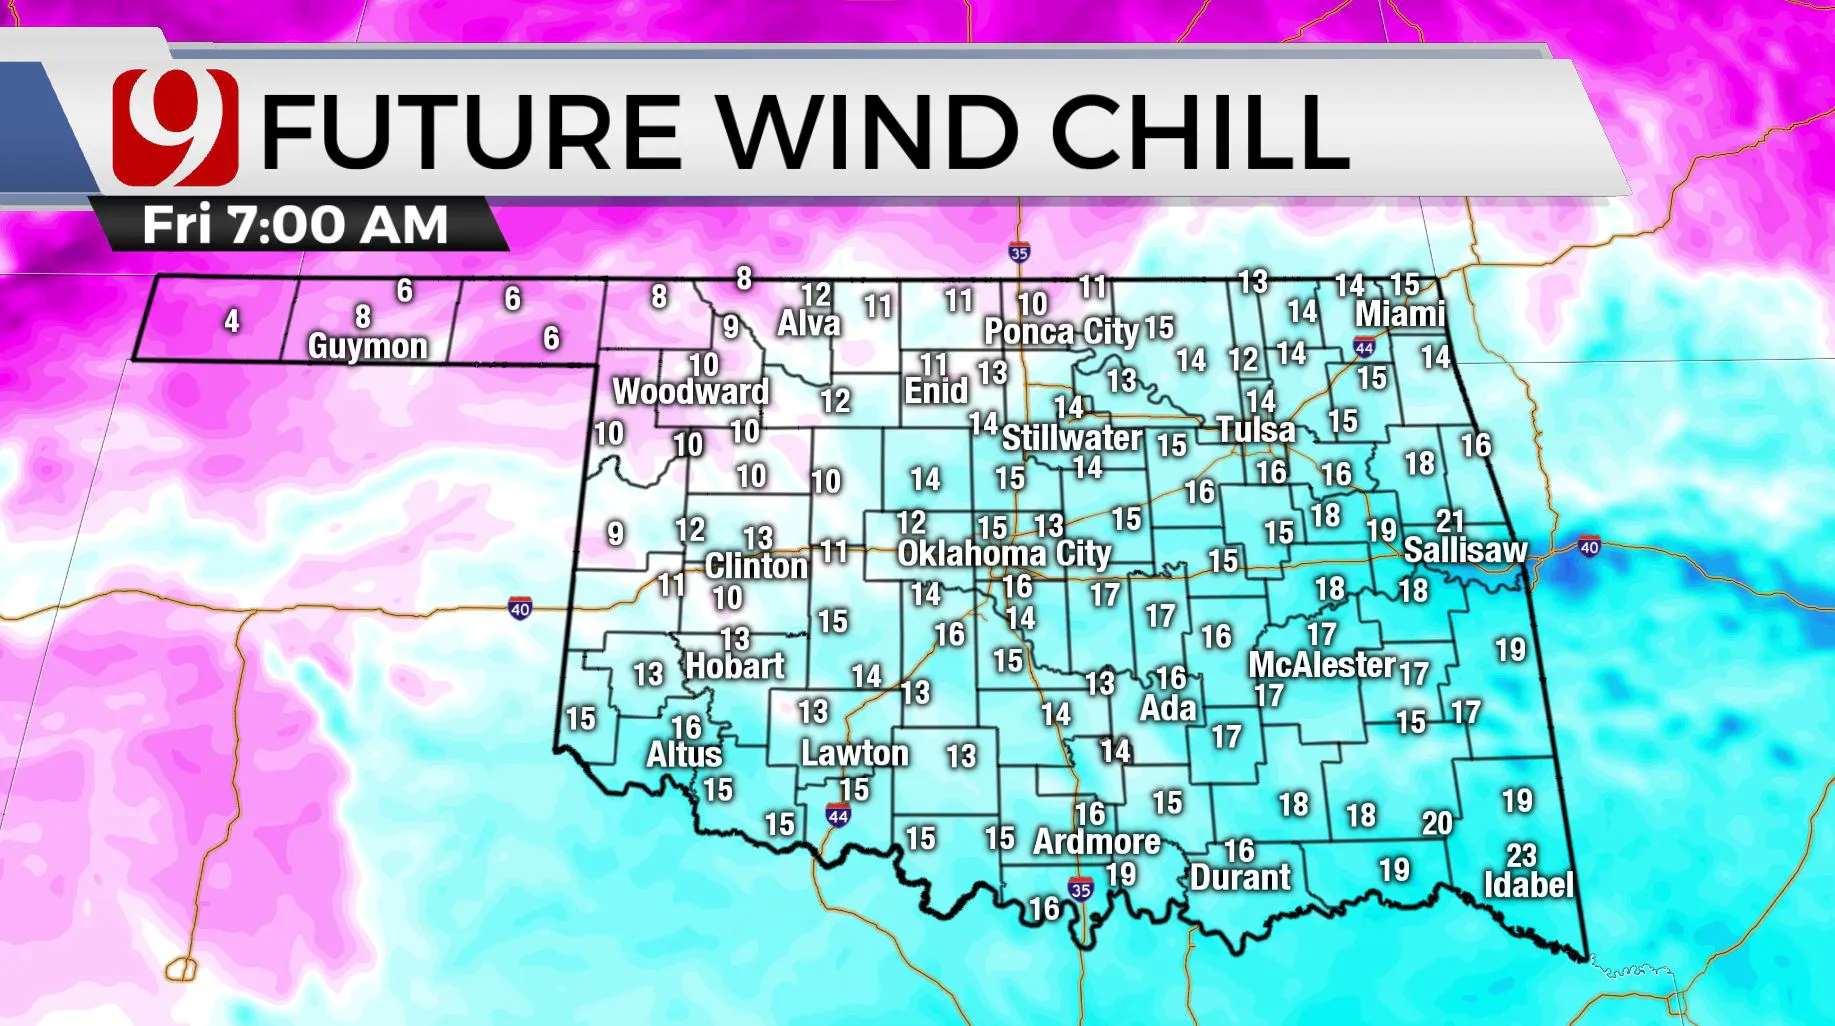 Future wind chill for Friday.